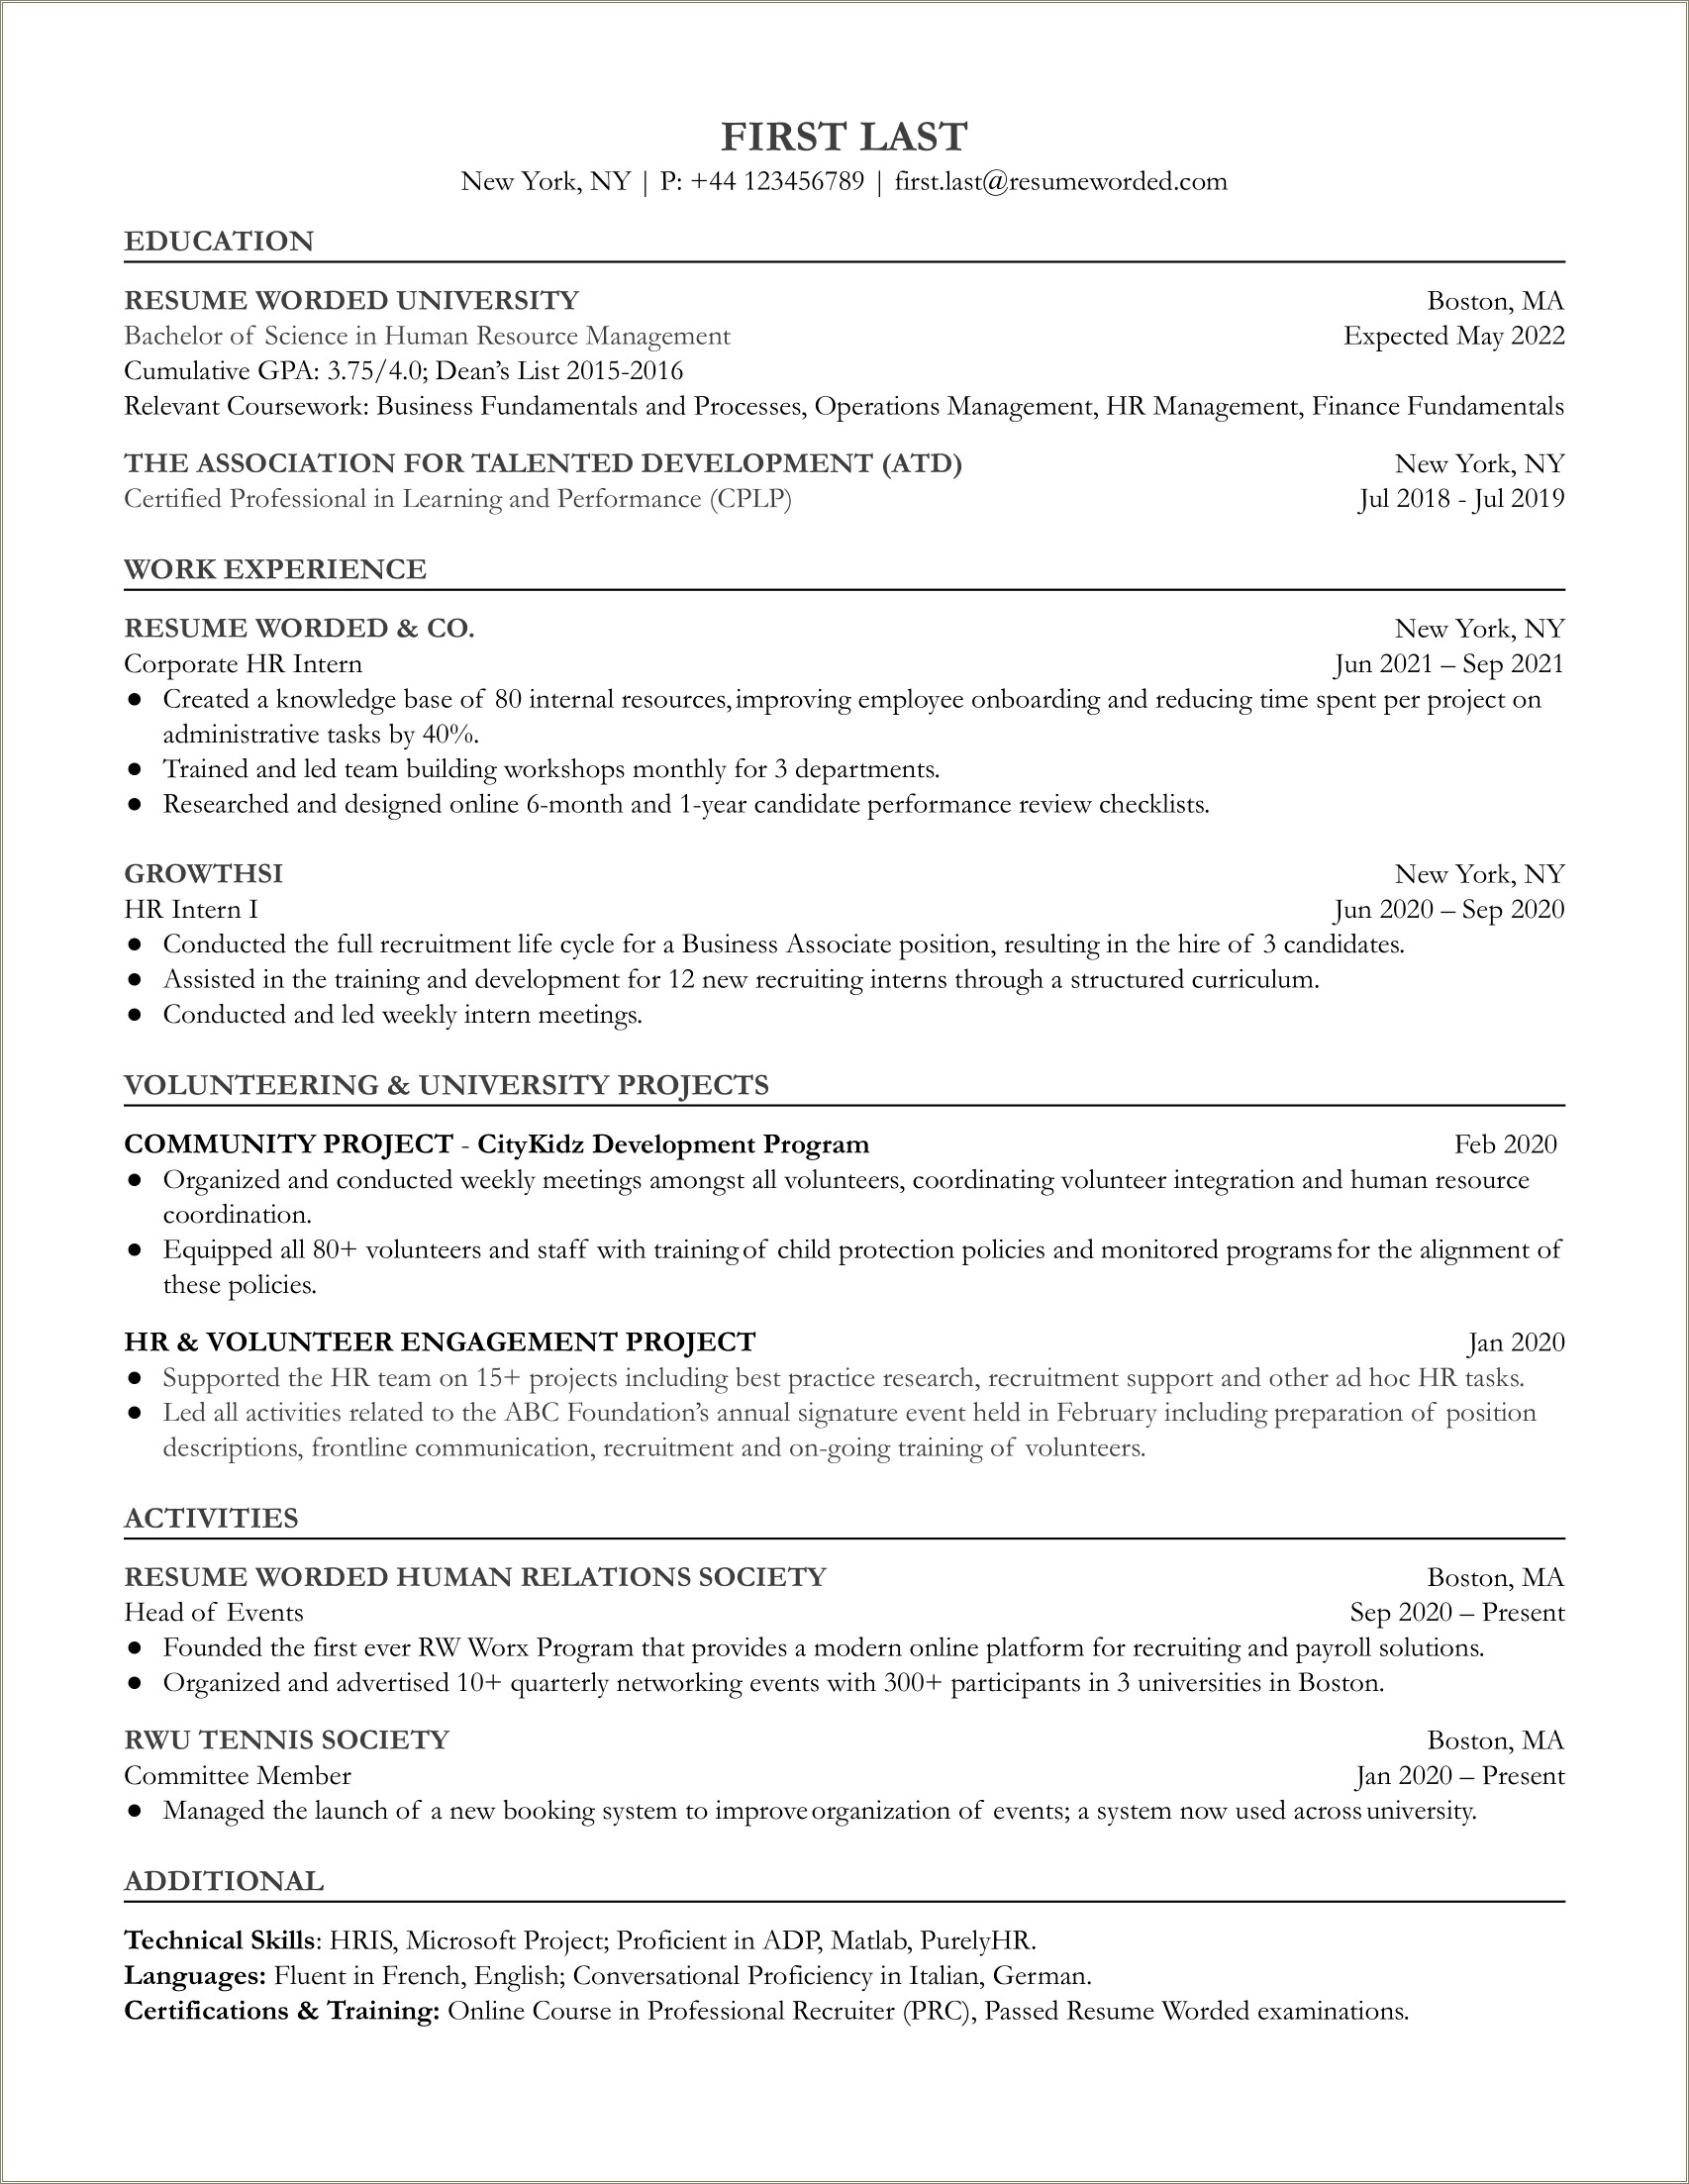 Hr Generalist Resume With 2 Years Experience